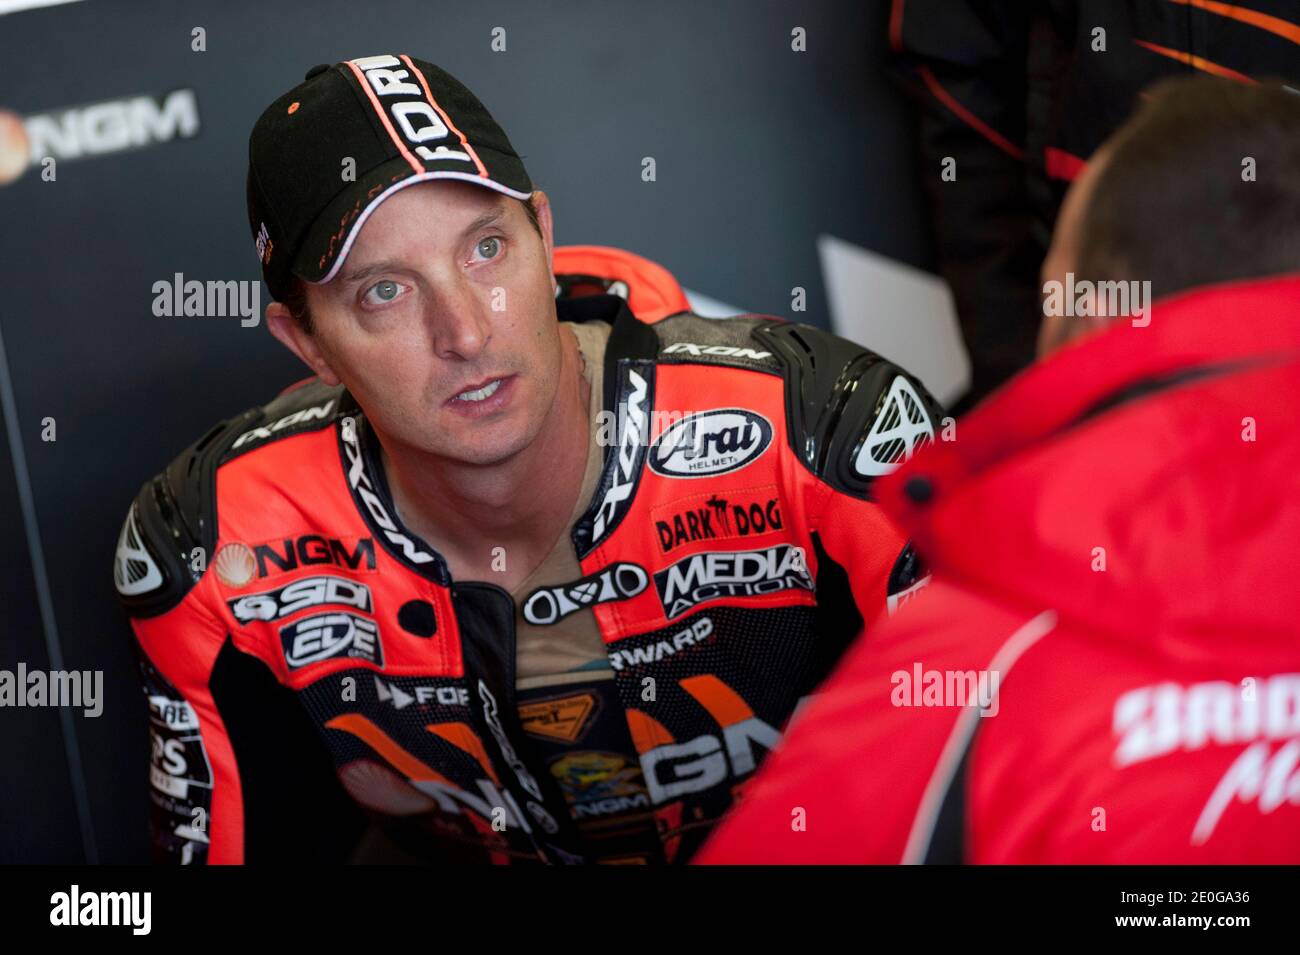 USA's MotoGP rider Colin Edwards during the MotoGP Great Britain Grand Prix in Silverstone, UK on June 17, 2012. Photo by Malkon/ABACAPRESS.COM Stock Photo